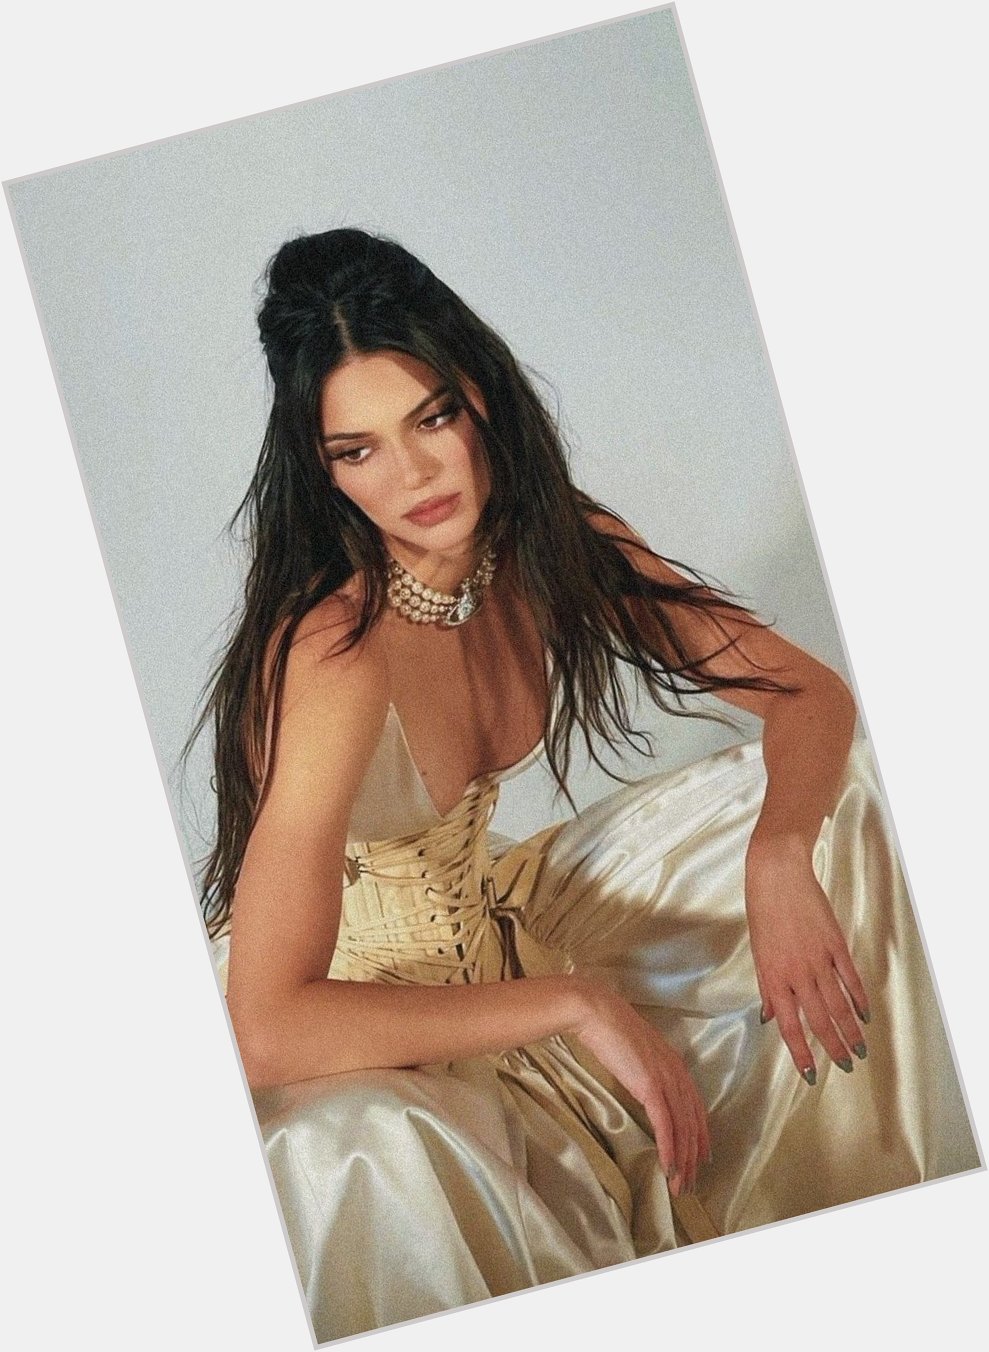 Happy birthday to kendall jenner 